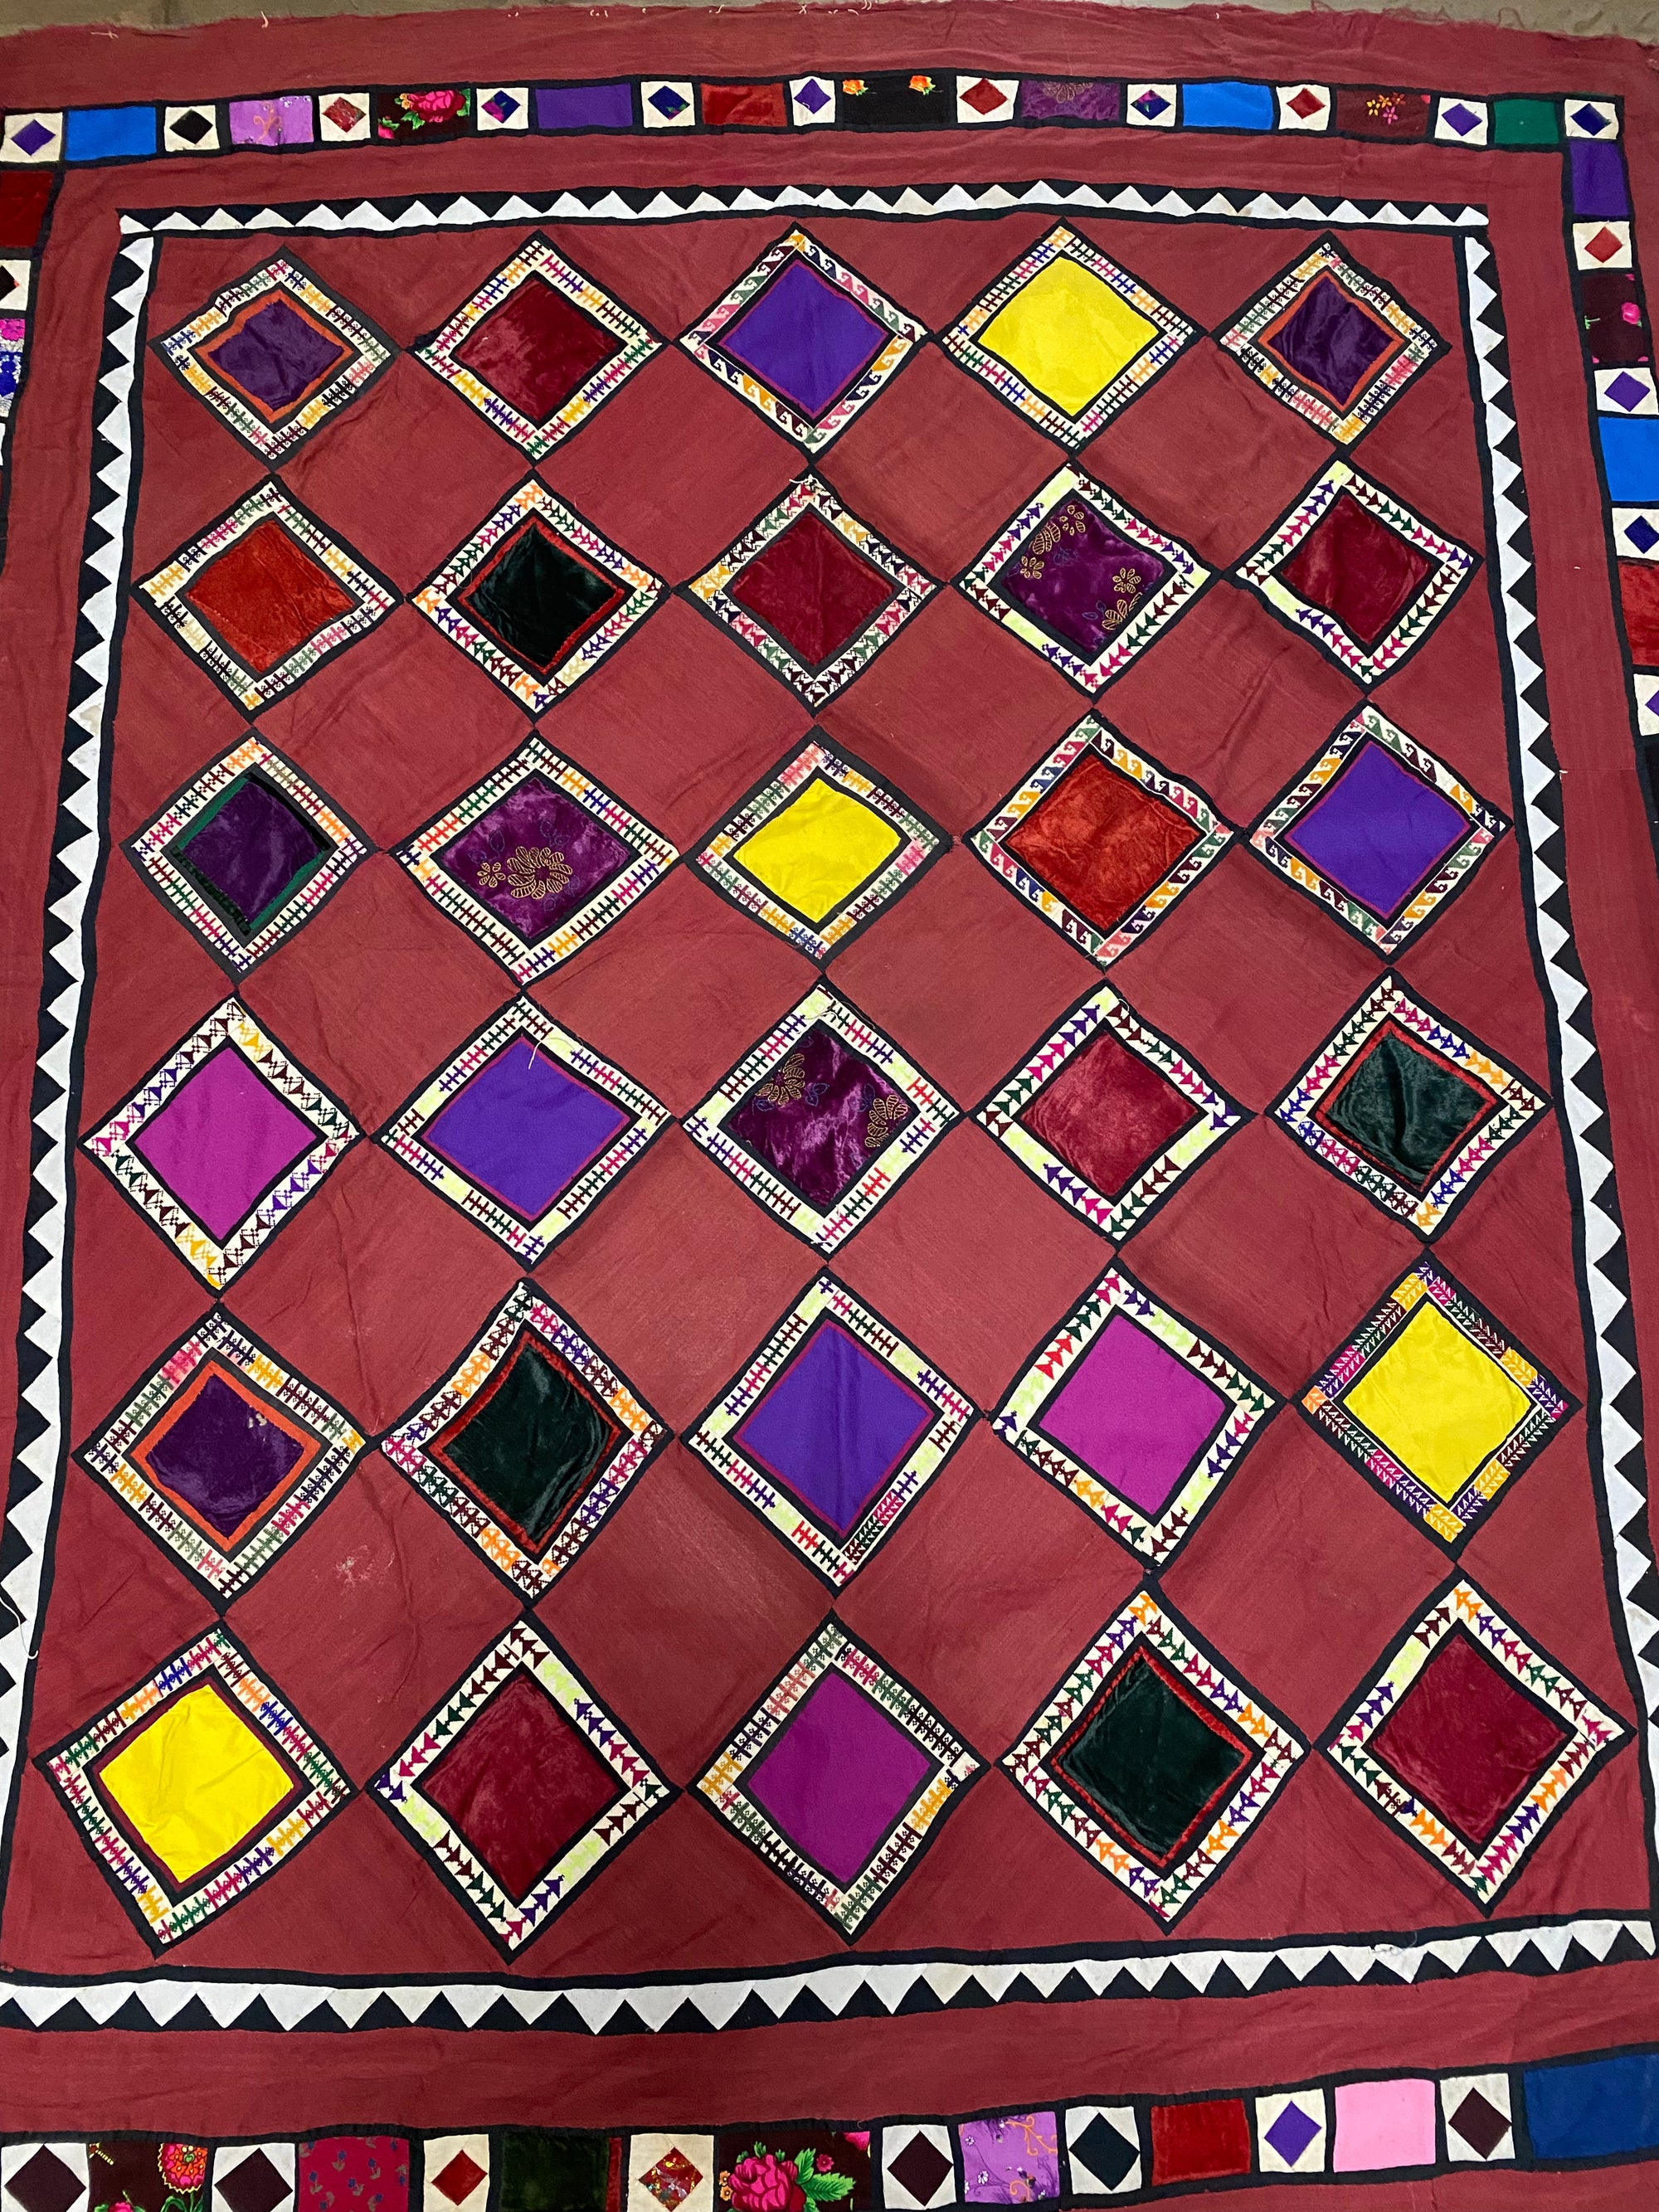 Uzbeki Afghani korak patchwork. Geometric patchwork of cotton, silk, velvet & embroidered fabric squares, framed with embroidery. Traditionally used by nomads as coverlets or wall hangings in their tents. Protects against evil eye. This is a fine example of this style of workmanship. Early 20th C: 200 x 173 cm